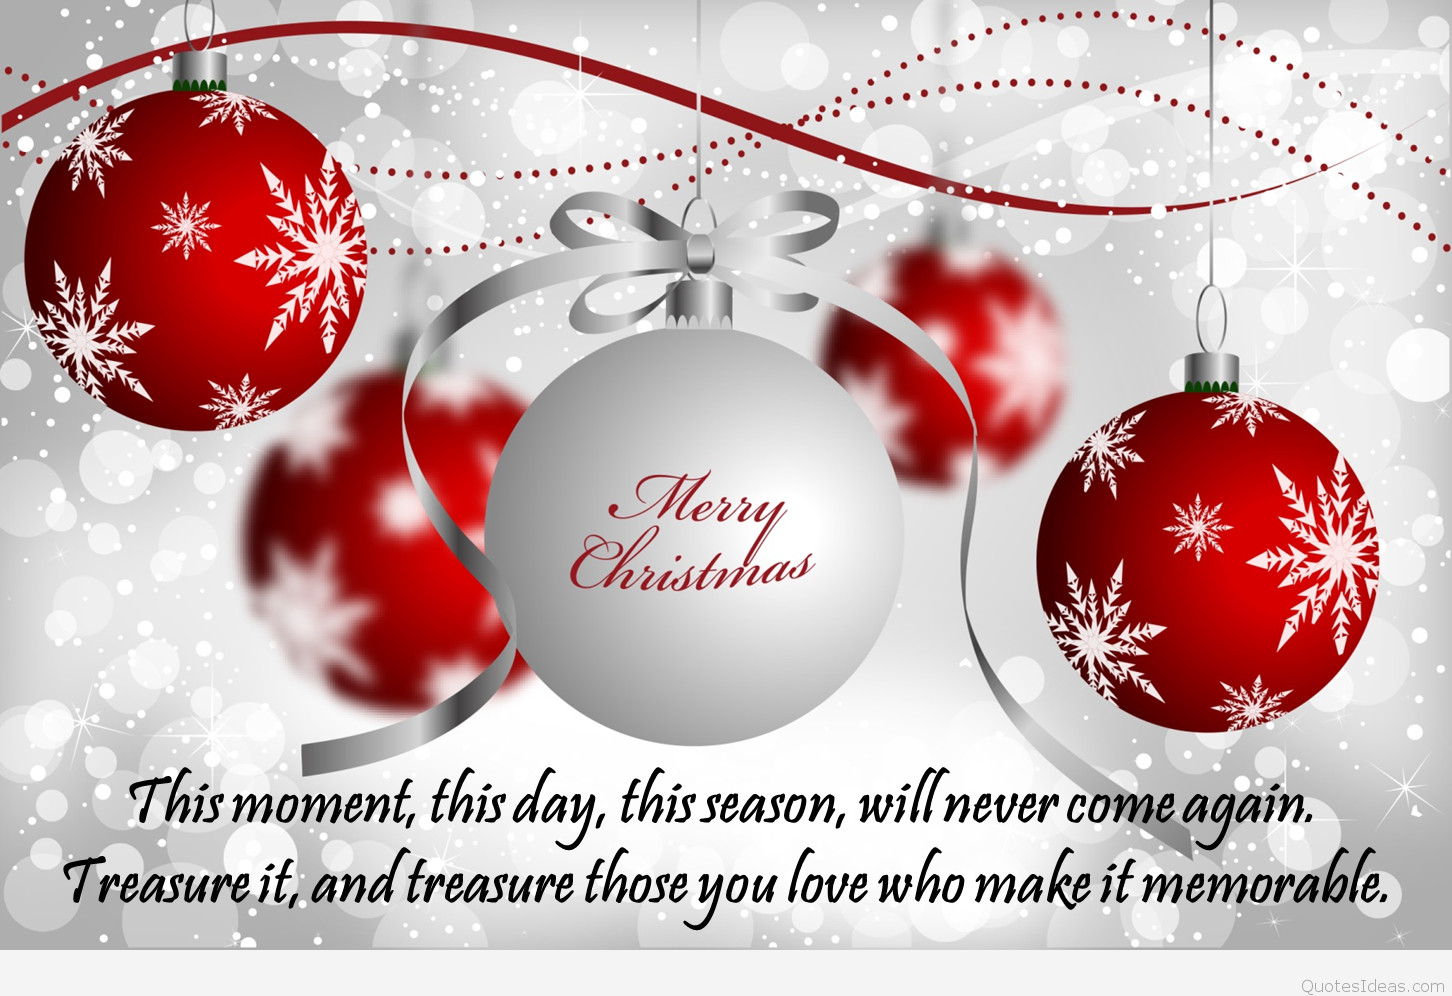 Merry Christmas Quotes Images
 Merry Christmas quotes